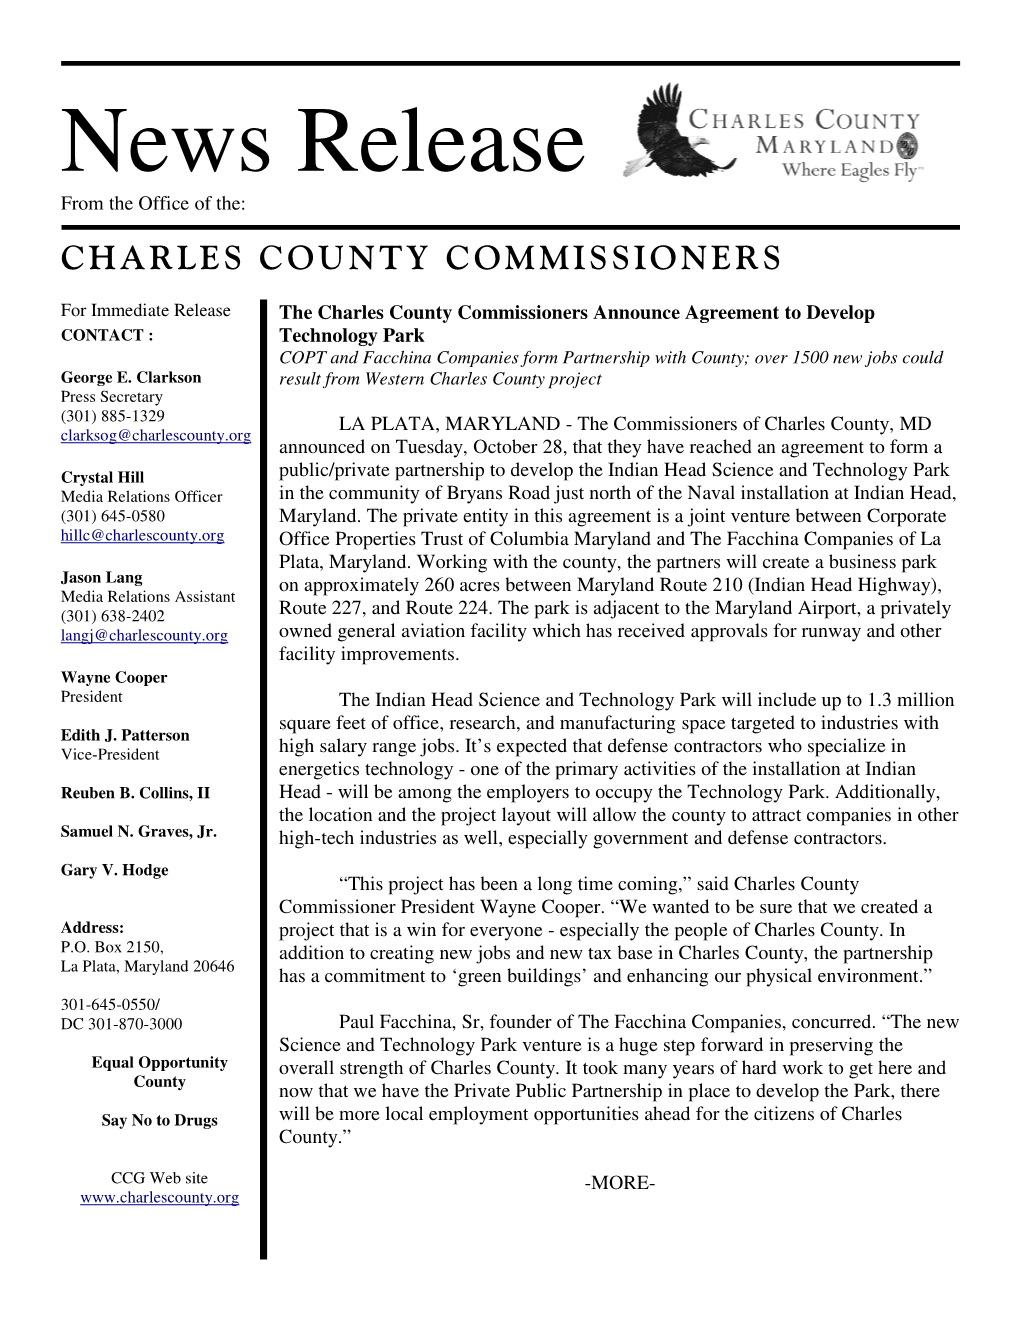 News Release Template 09.06.08